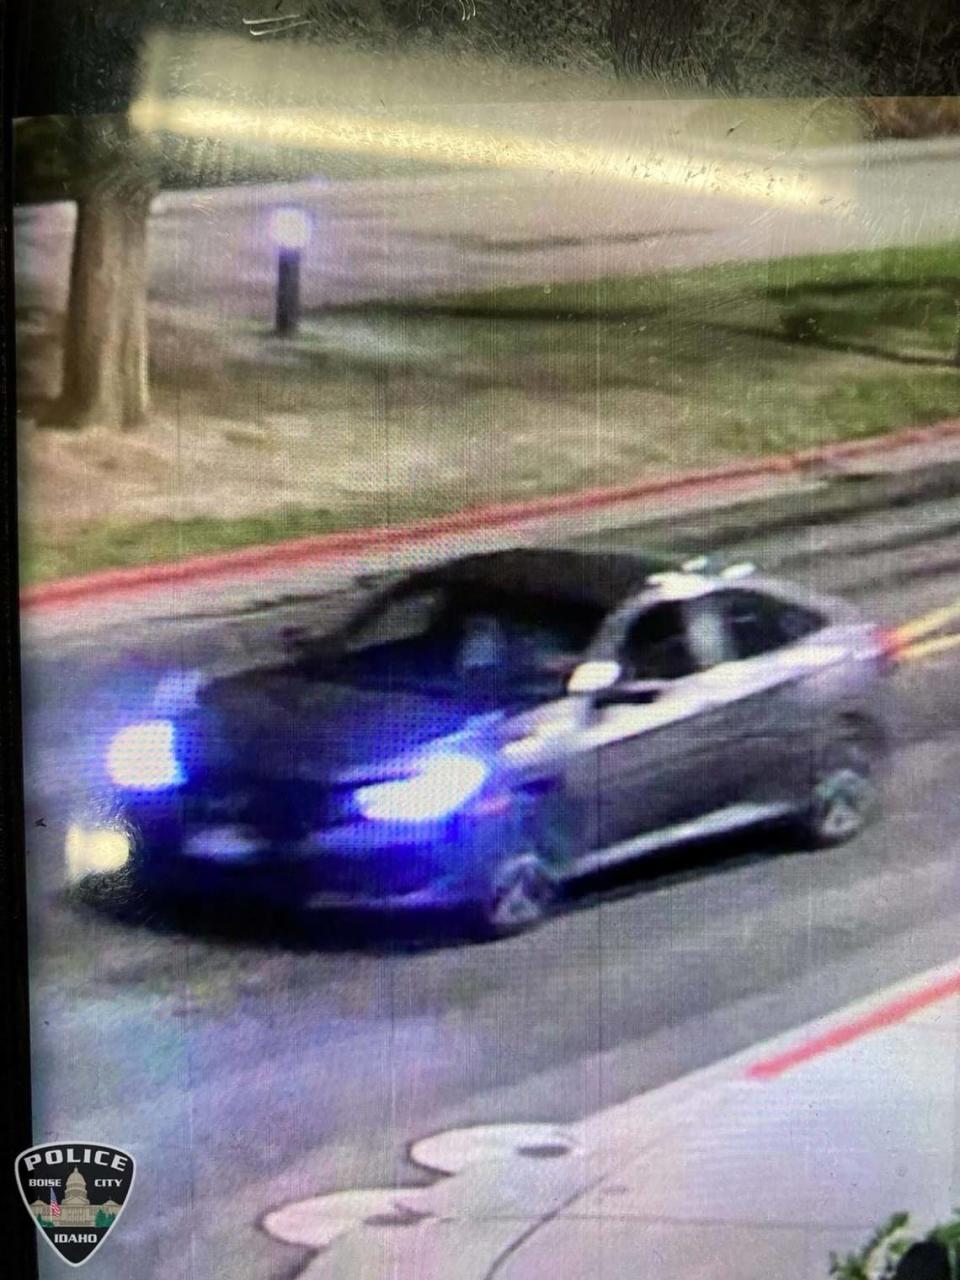 Police said Skylar Meade may be traveling in a gray four-door sedan, possibly a Honda Civic with Idaho license plates. Boise Police Department